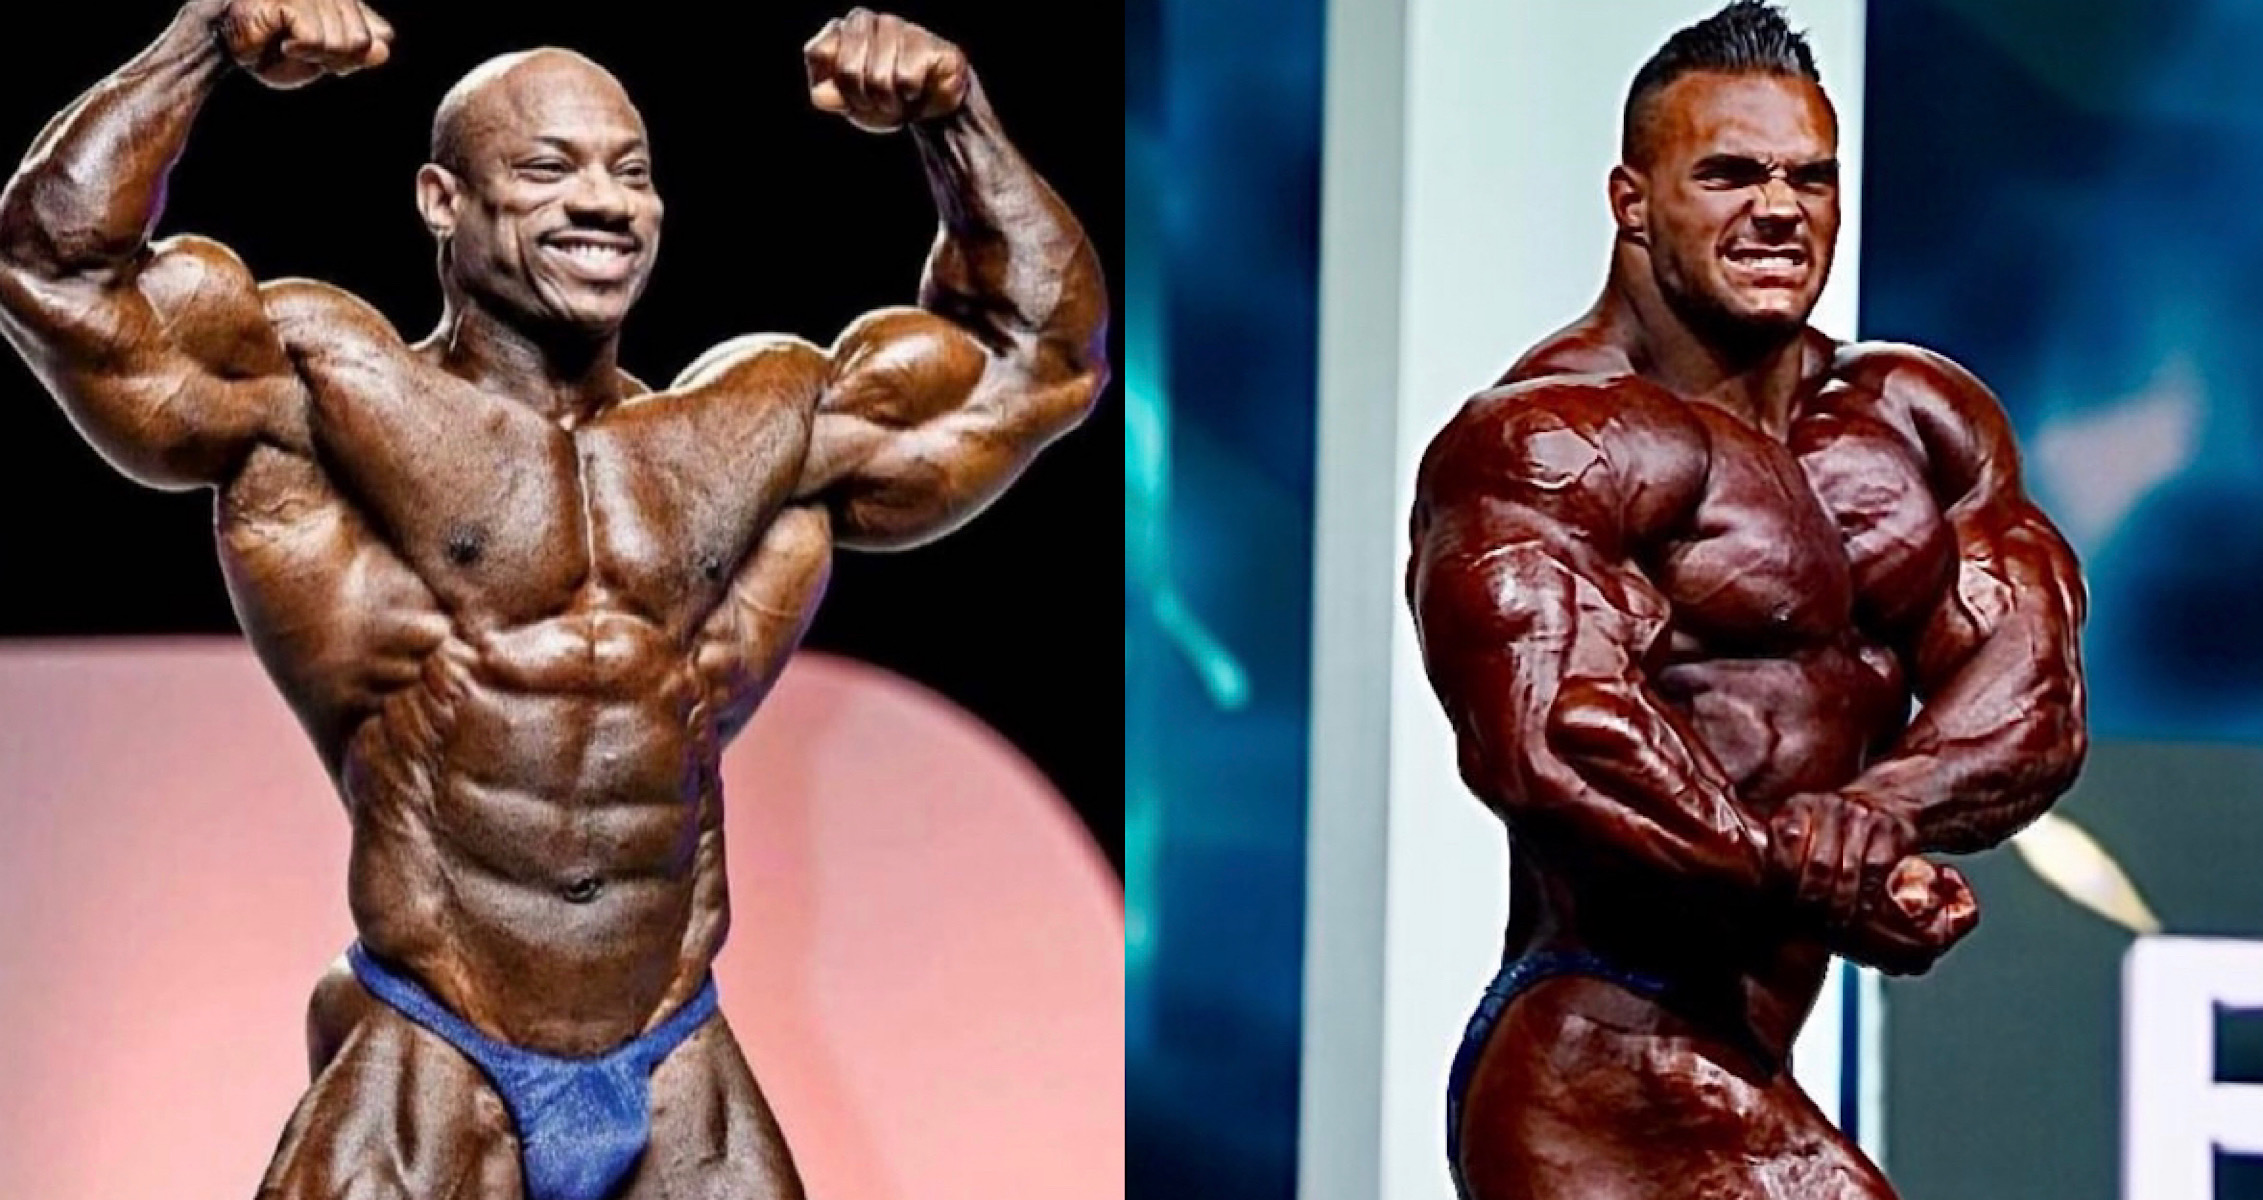 Dexter Jackson Says Nick Walker “Doesn’t Have a Very Pleasing Physique”